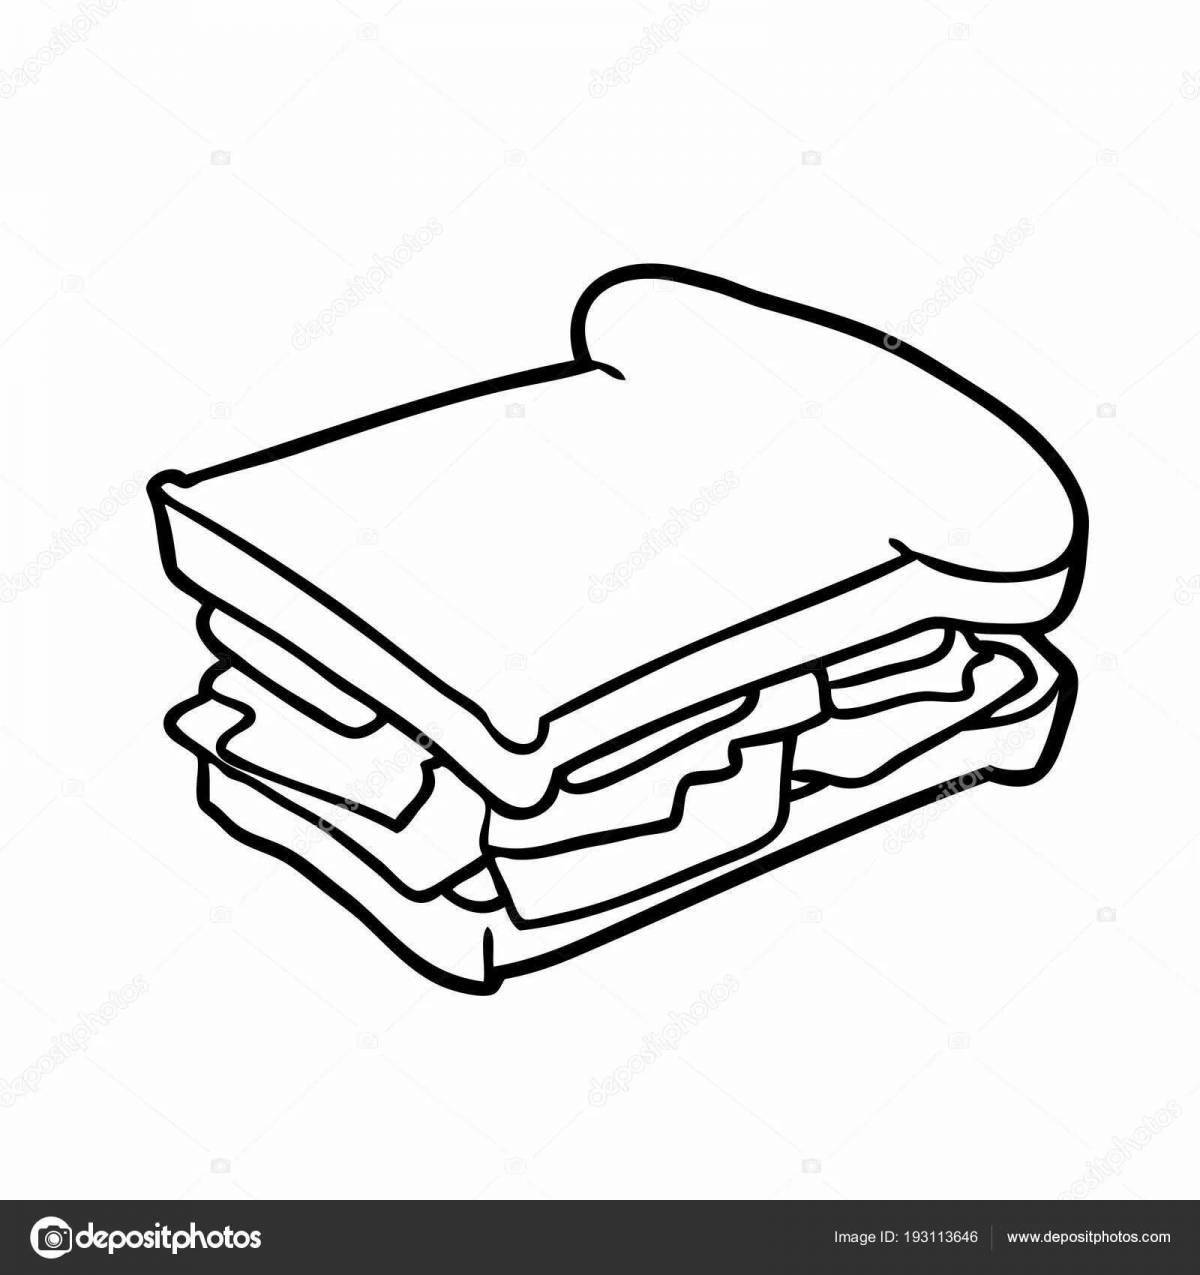 Inviting sausage sandwich coloring page